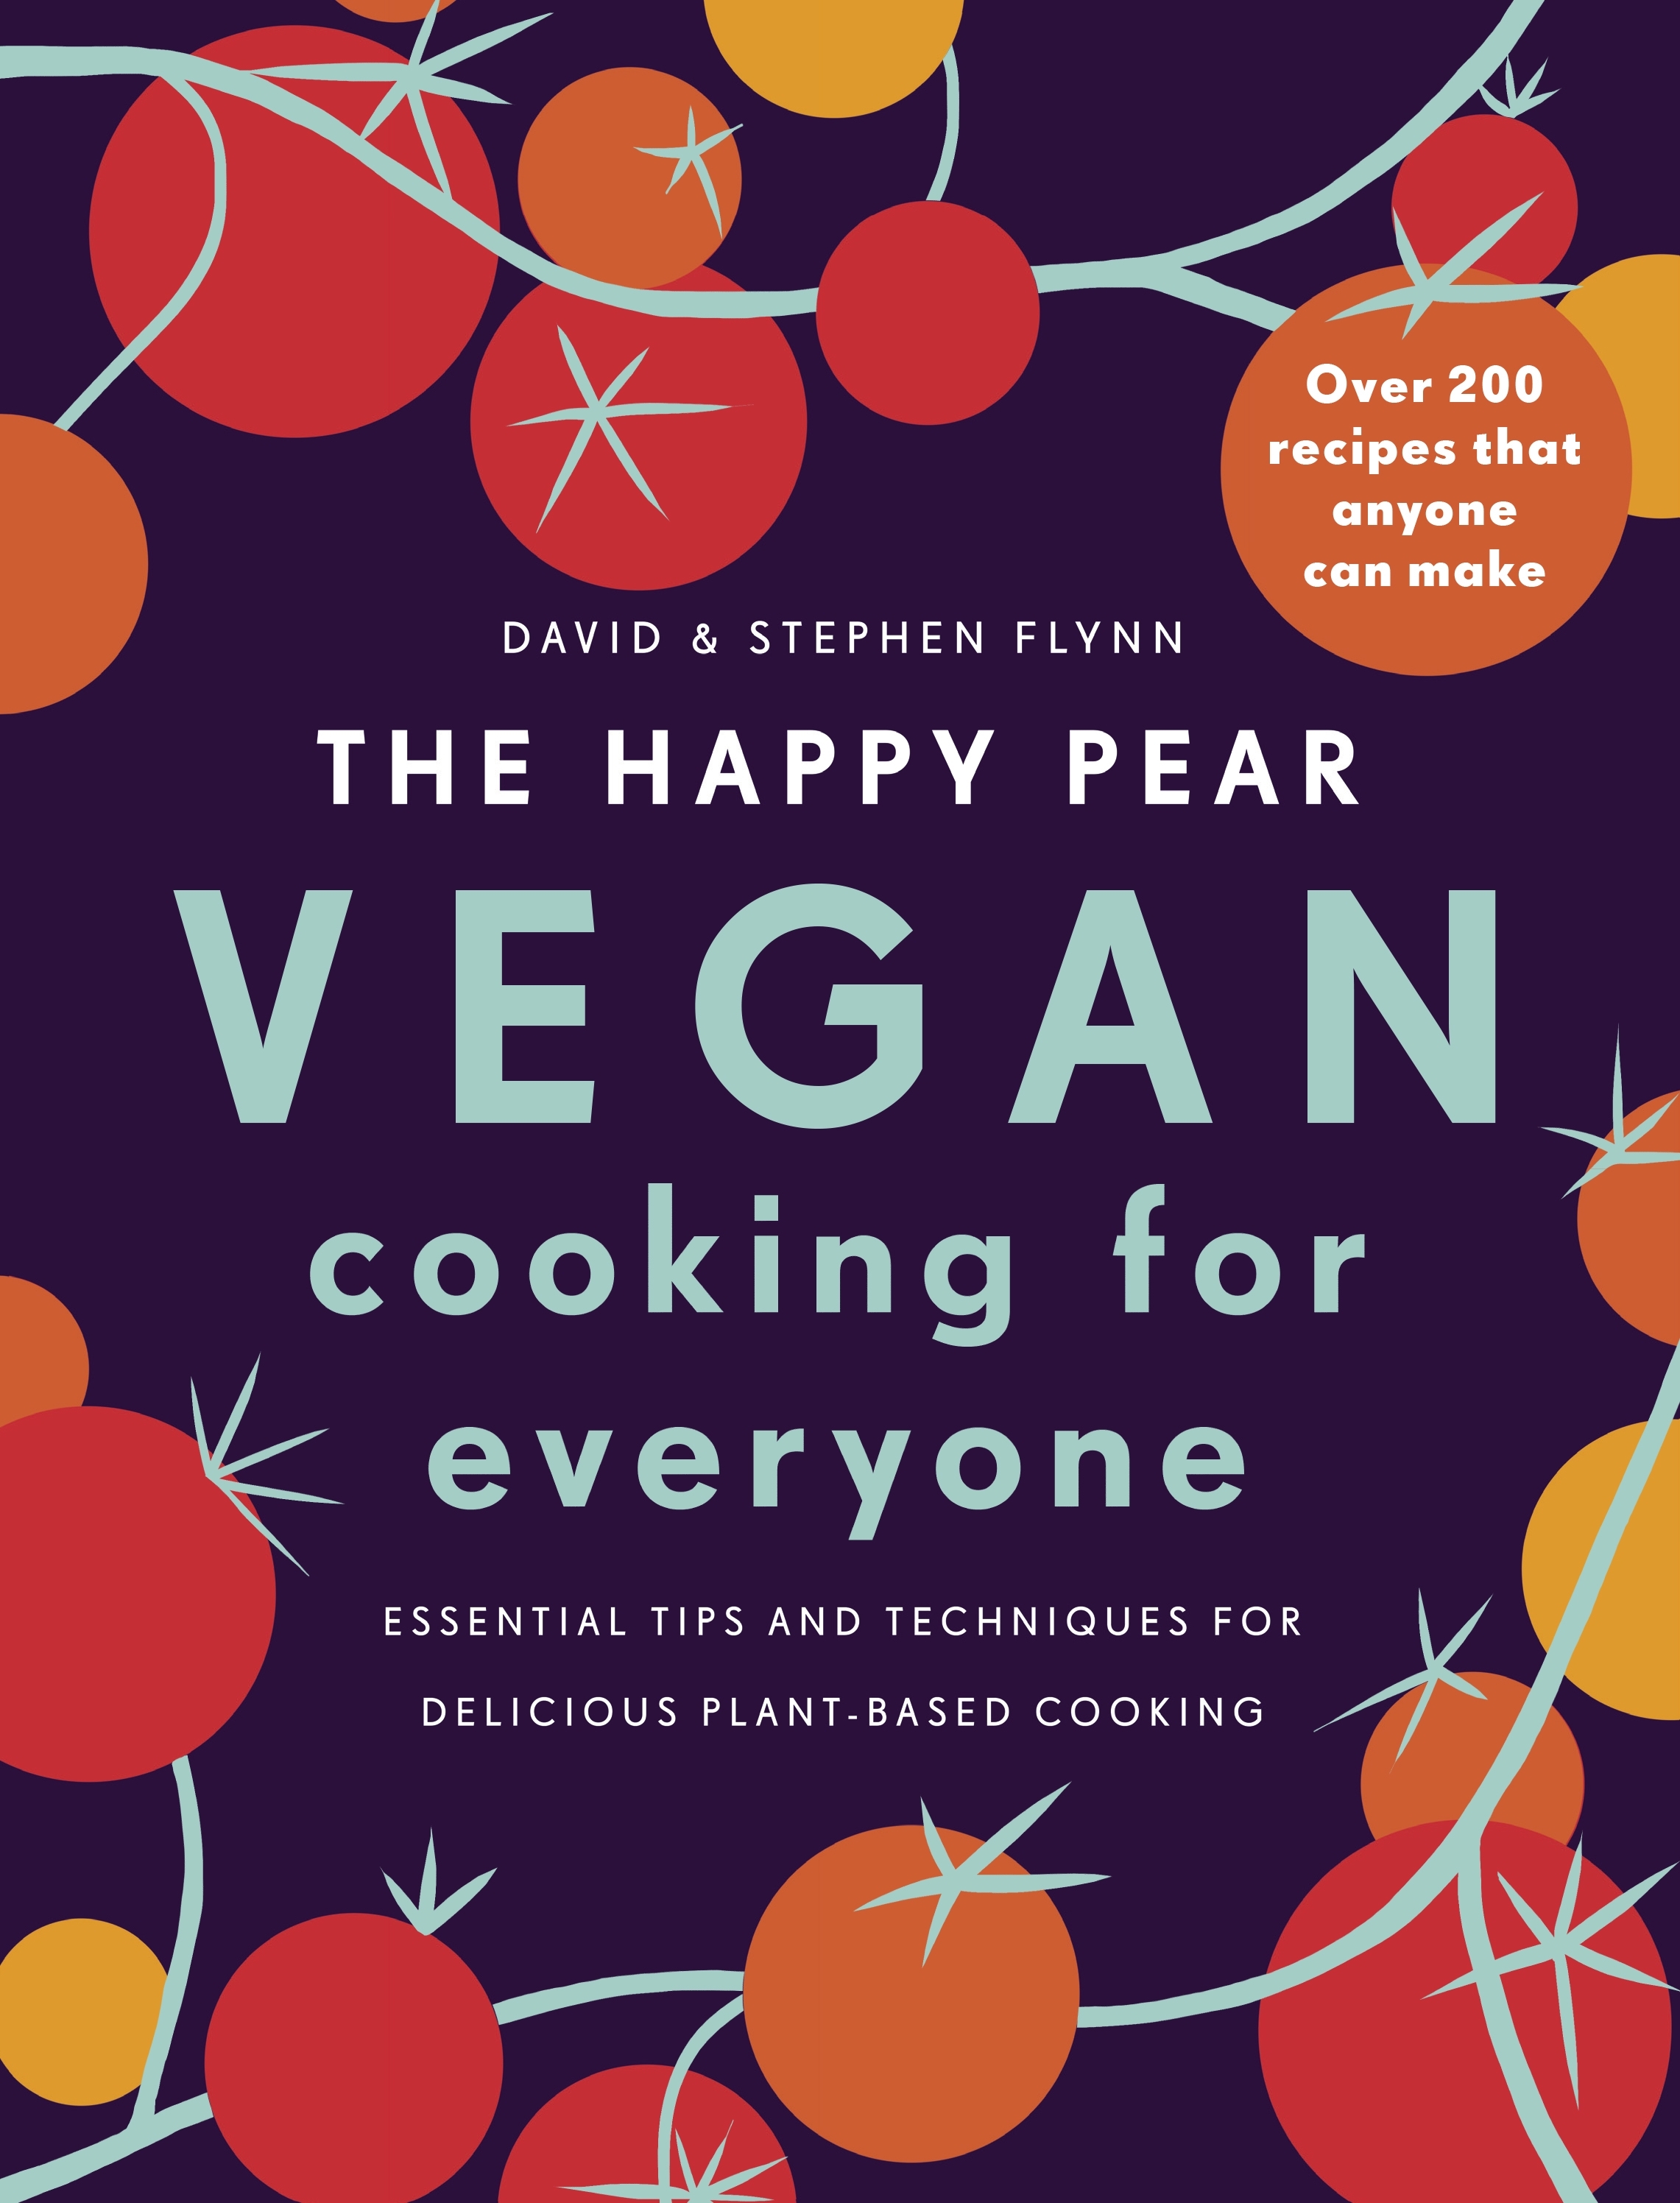 THE HAPPY PEARE : VEGAN COOKING FOR EVERYONE